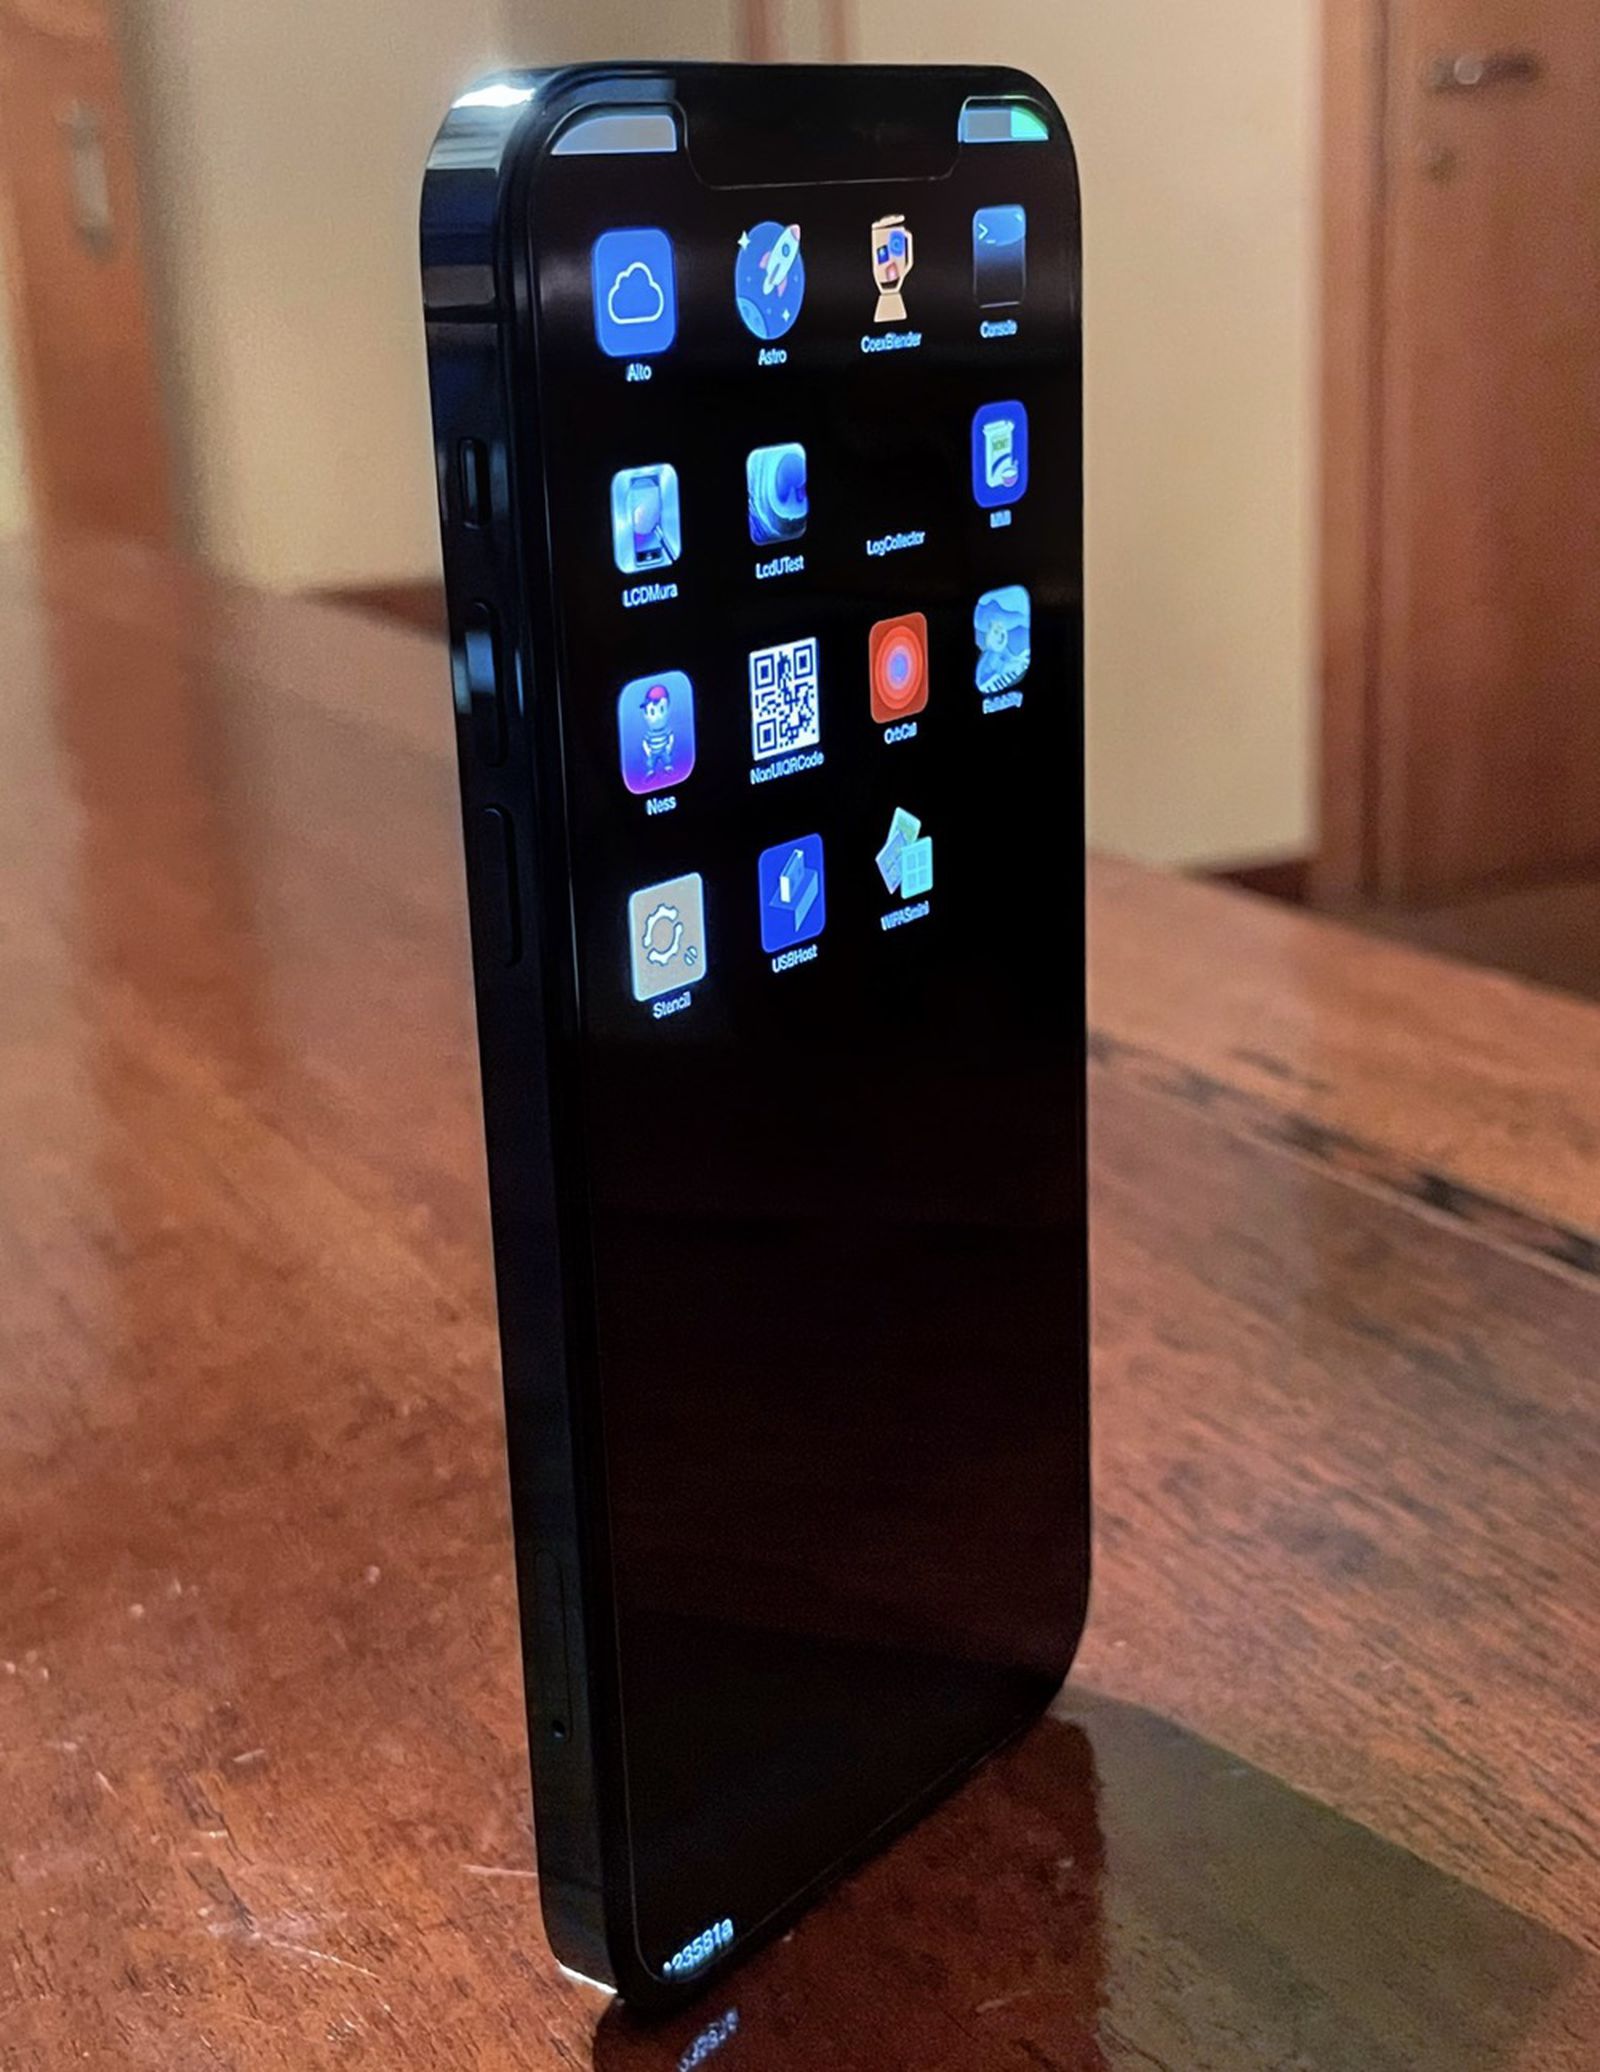 The iPhone 12 Pro prototype is shown in the photos